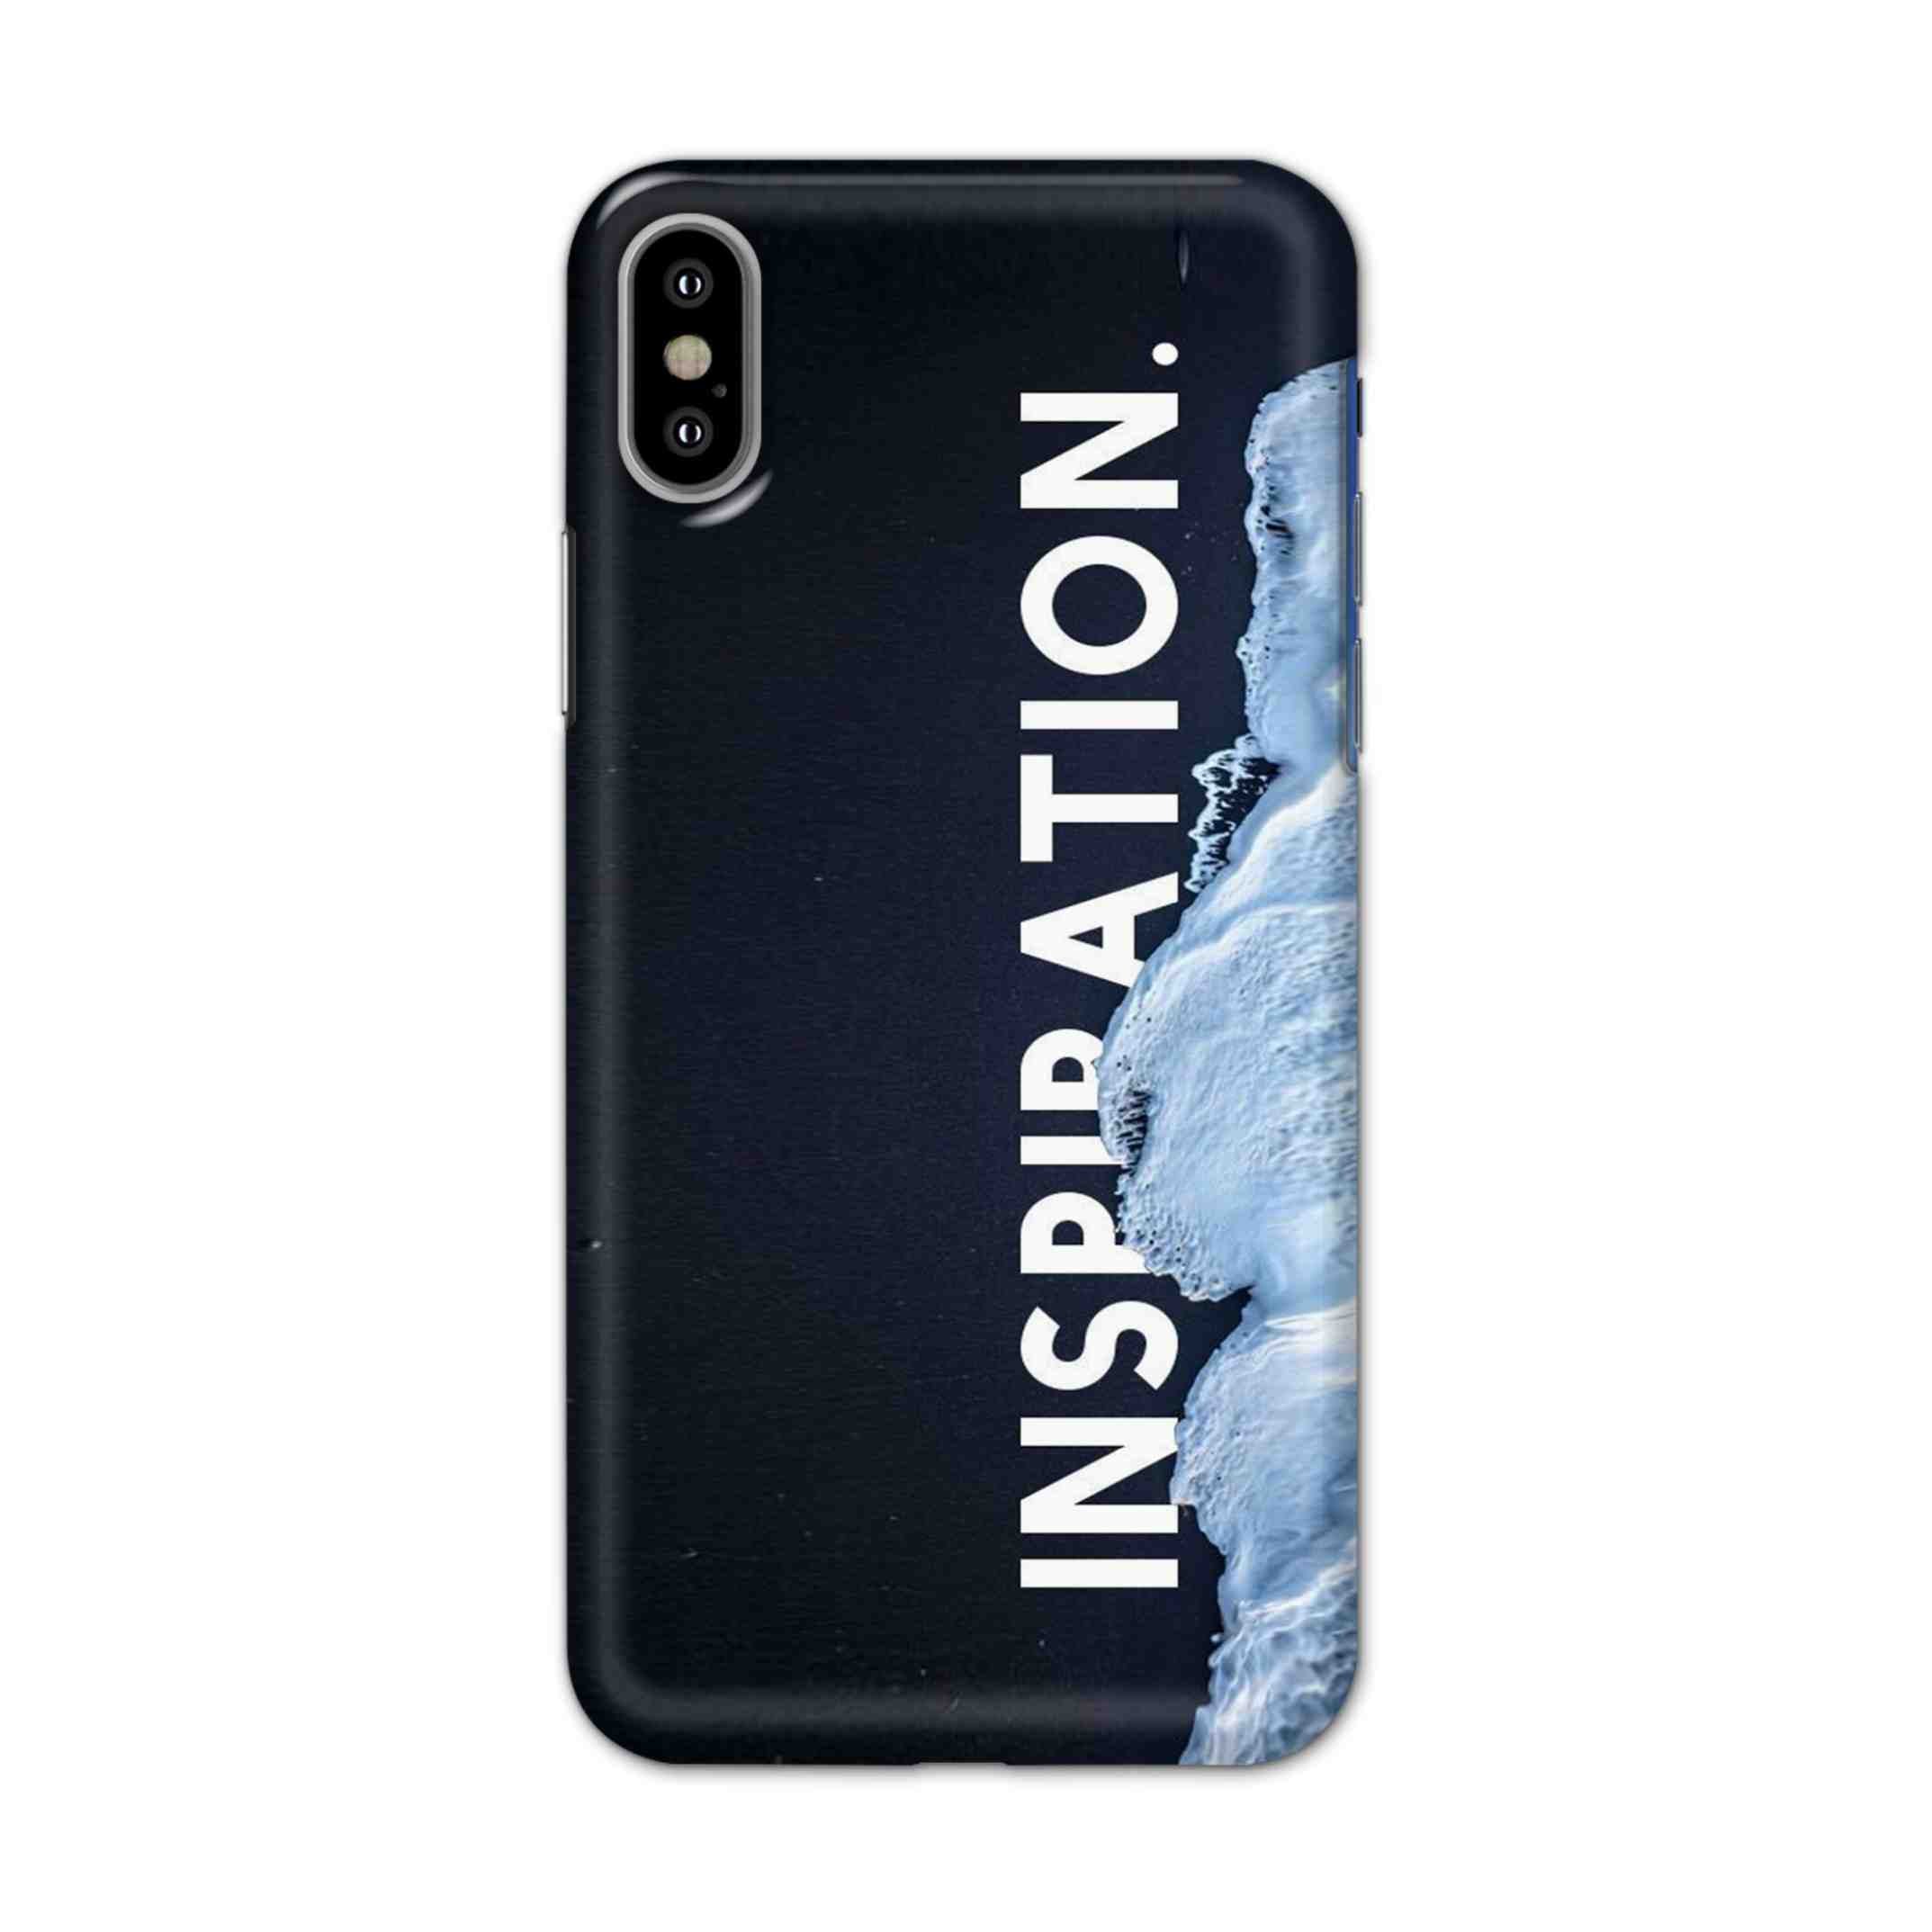 Buy Inspiration Hard Back Mobile Phone Case/Cover For iPhone X Online